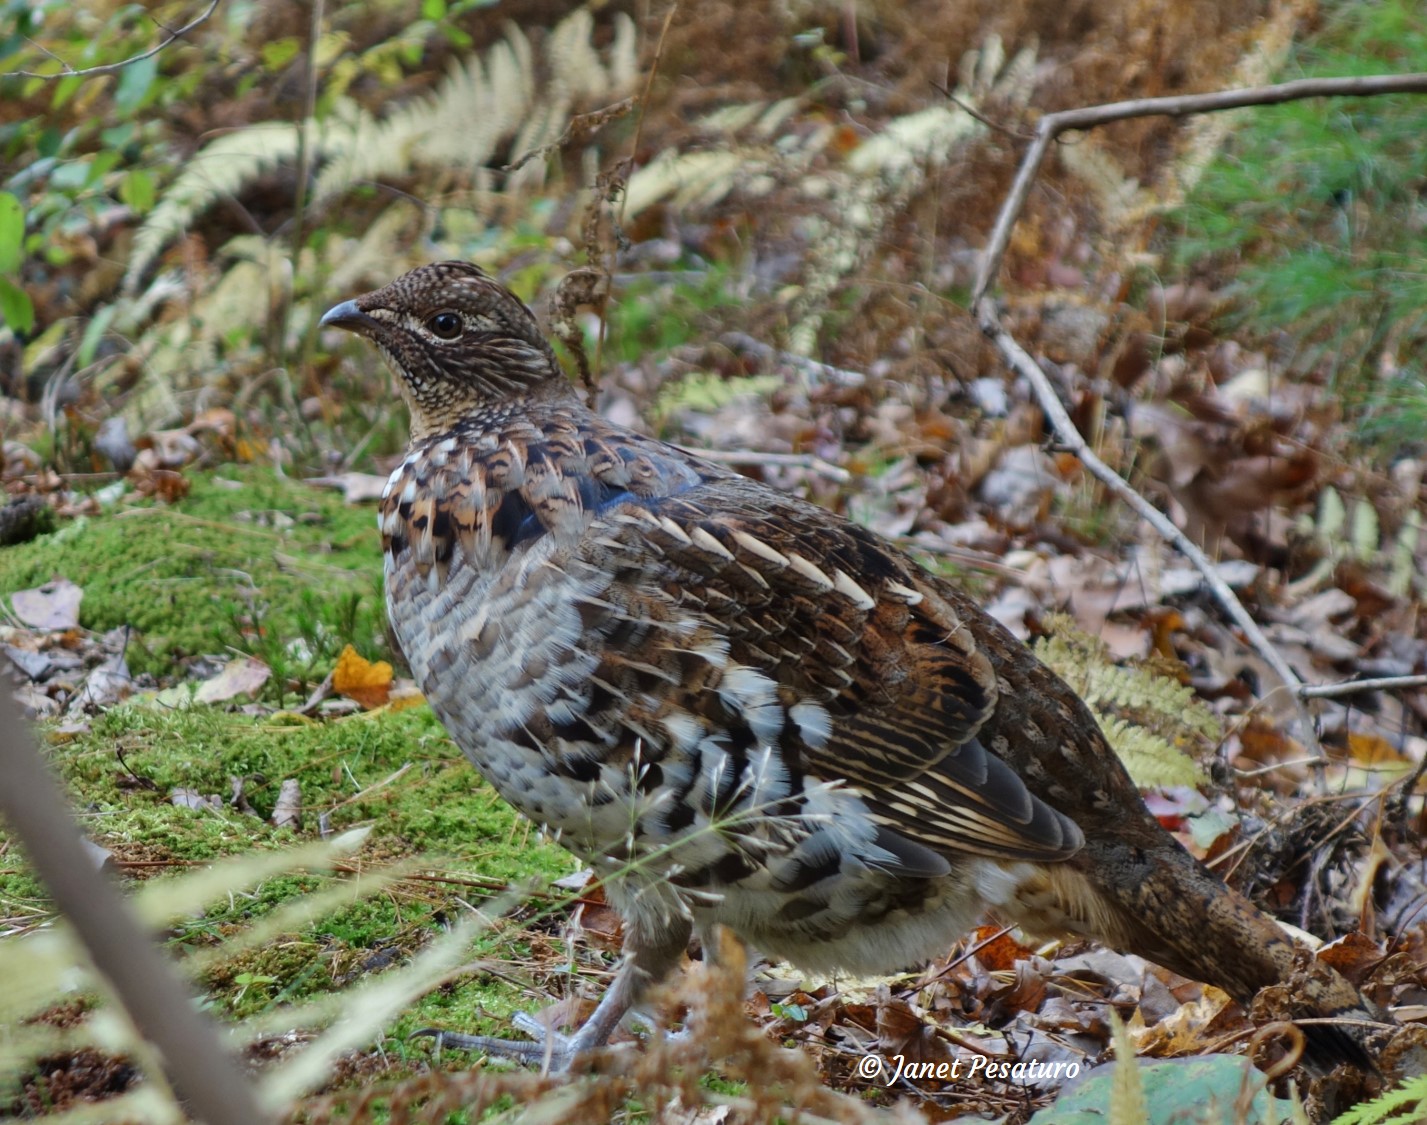 territorial ruffed grouse photographed at close range